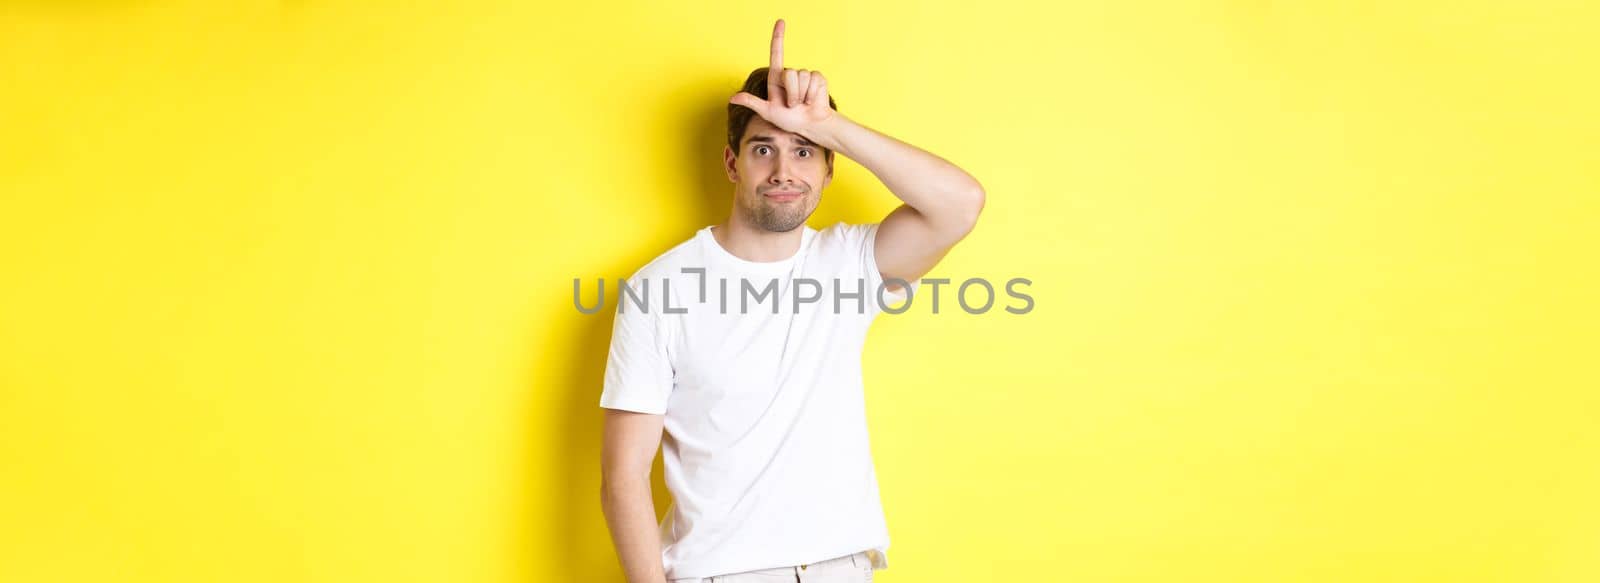 Awkward guy showing loser sign on forehead, looking sad and gloomy, standing in white t-shirt against yellow background.